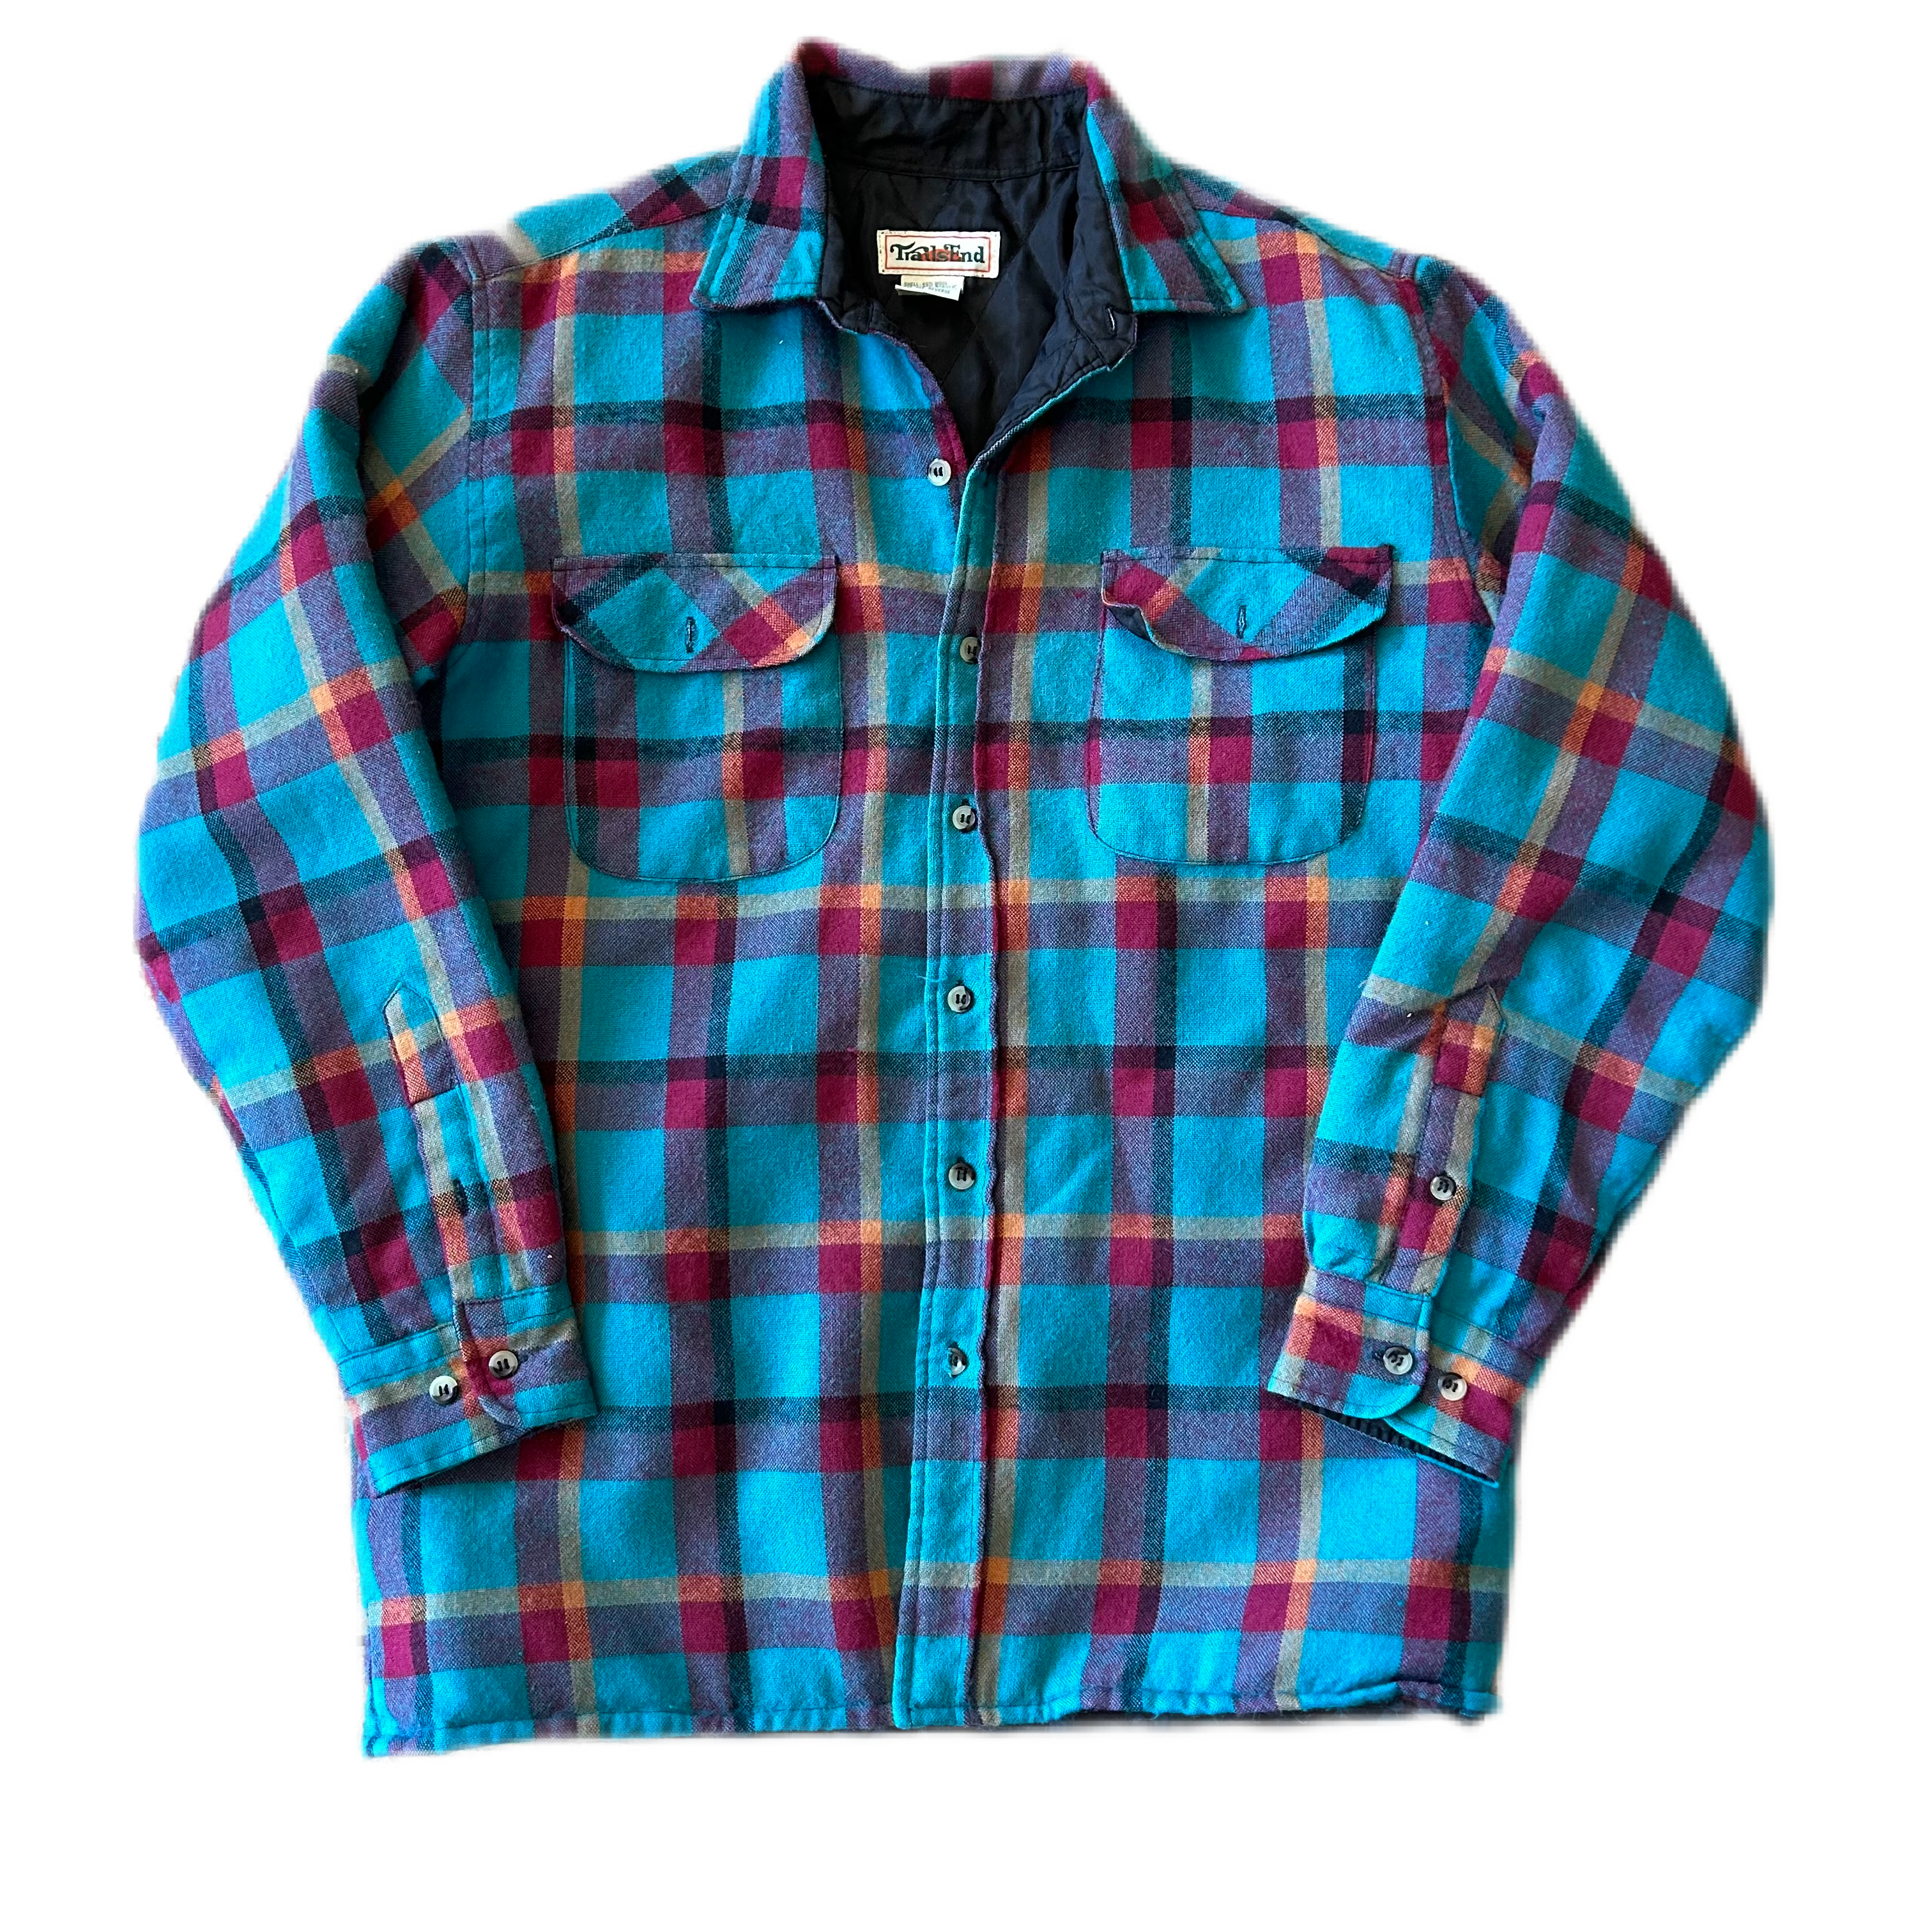 Vintage 2000s Flannel with thermal liner